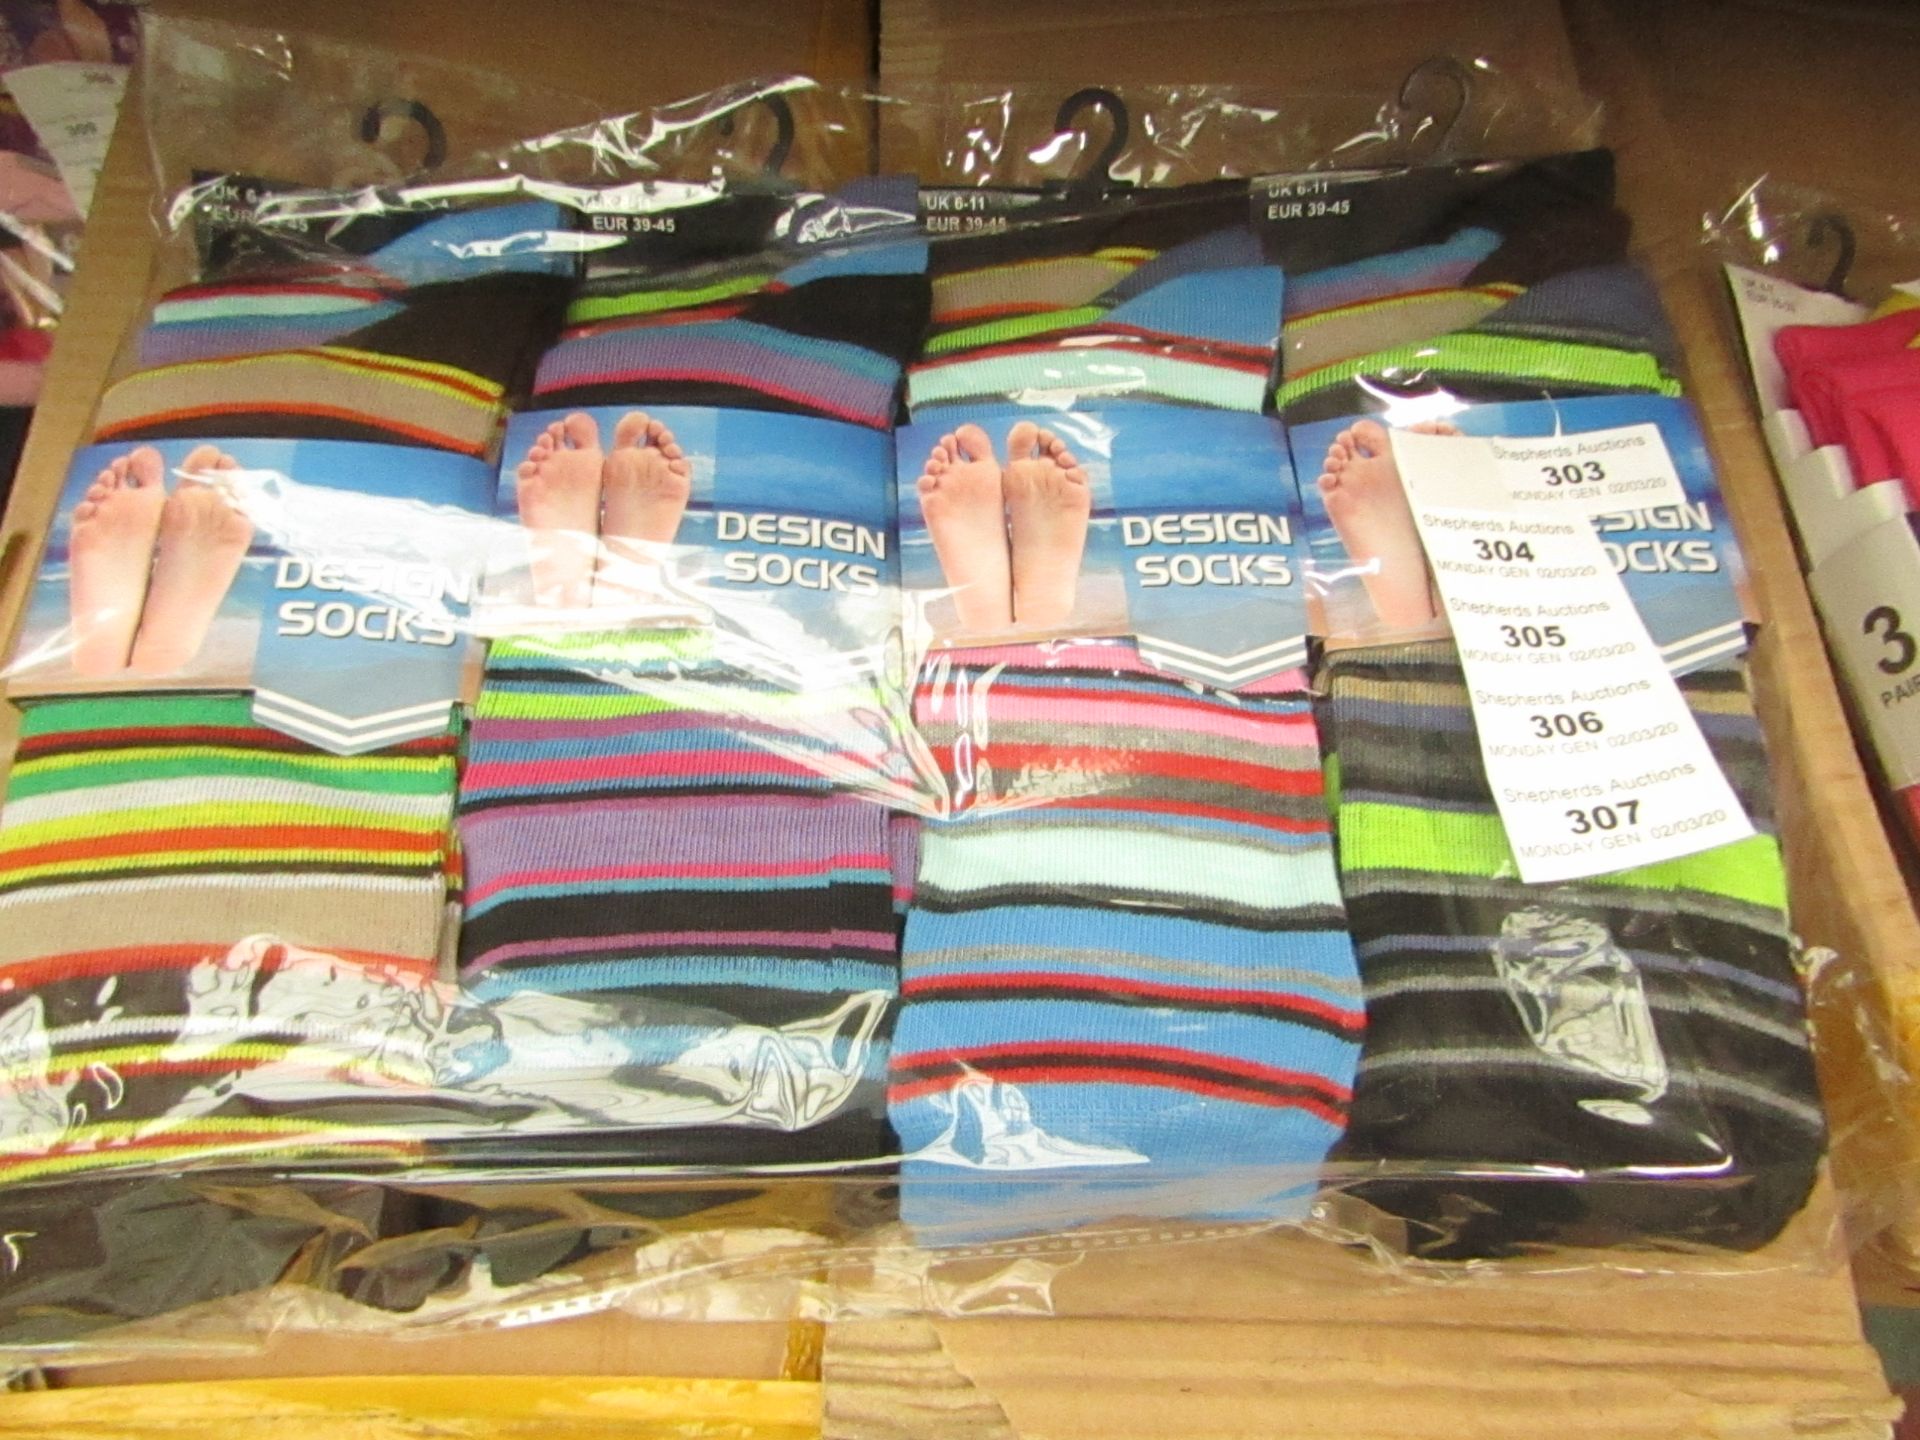 12 Pairs of Mens Design Socks. Size 6 - 11. New & Packaged